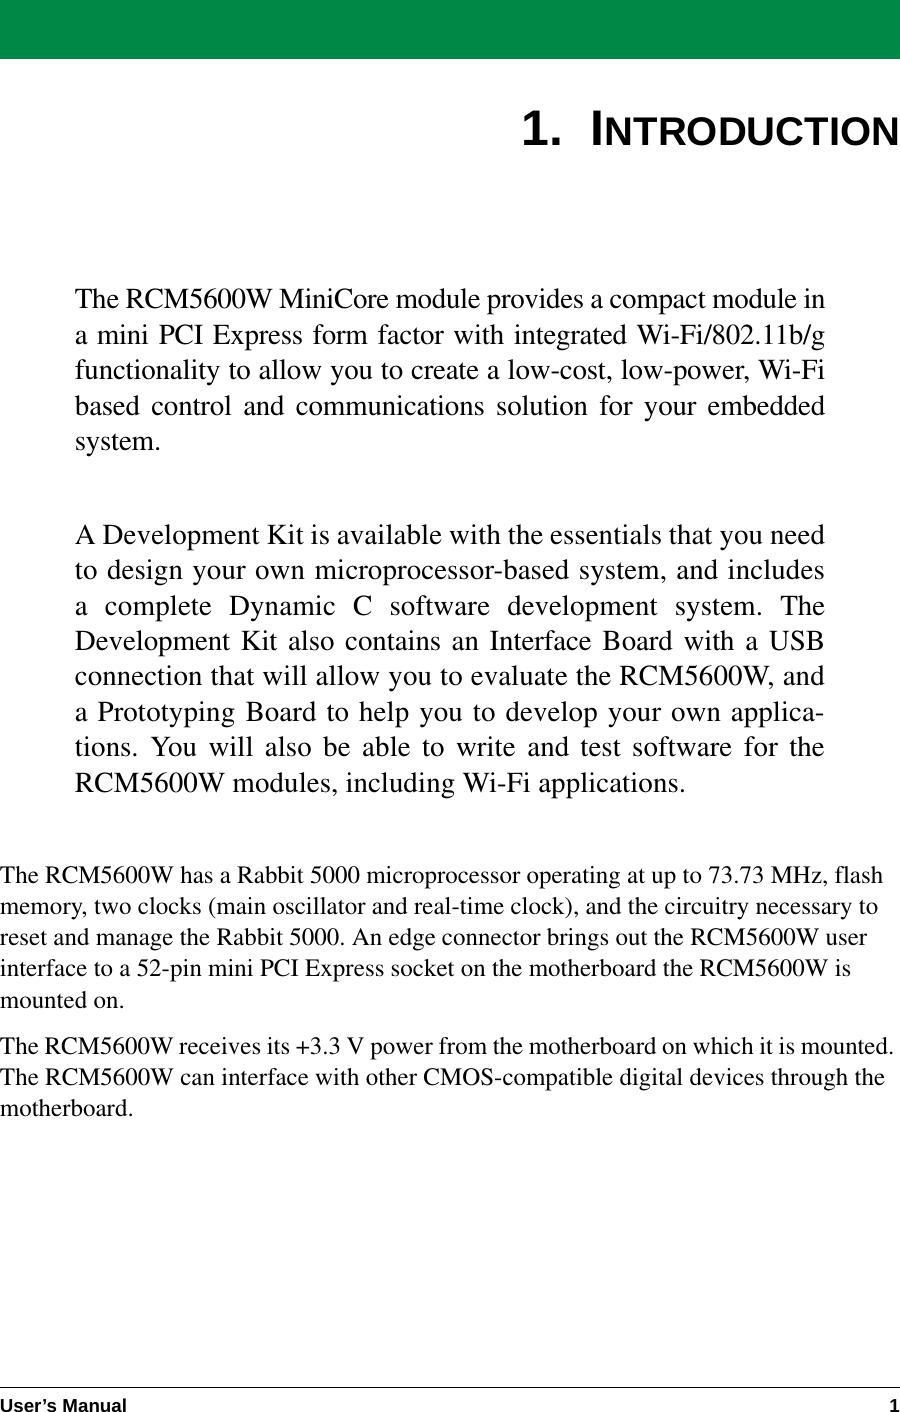 User’s Manual 11.  INTRODUCTIONThe RCM5600W MiniCore module provides a compact module ina mini PCI Express form factor with integrated Wi-Fi/802.11b/gfunctionality to allow you to create a low-cost, low-power, Wi-Fibased control and communications solution for your embeddedsystem.A Development Kit is available with the essentials that you needto design your own microprocessor-based system, and includesa complete Dynamic C software development system. TheDevelopment Kit also contains an Interface Board with a USBconnection that will allow you to evaluate the RCM5600W, anda Prototyping Board to help you to develop your own applica-tions. You will also be able to write and test software for theRCM5600W modules, including Wi-Fi applications.The RCM5600W has a Rabbit 5000 microprocessor operating at up to 73.73 MHz, flash memory, two clocks (main oscillator and real-time clock), and the circuitry necessary to reset and manage the Rabbit 5000. An edge connector brings out the RCM5600W user interface to a 52-pin mini PCI Express socket on the motherboard the RCM5600W is mounted on.The RCM5600W receives its +3.3 V power from the motherboard on which it is mounted. The RCM5600W can interface with other CMOS-compatible digital devices through the motherboard.